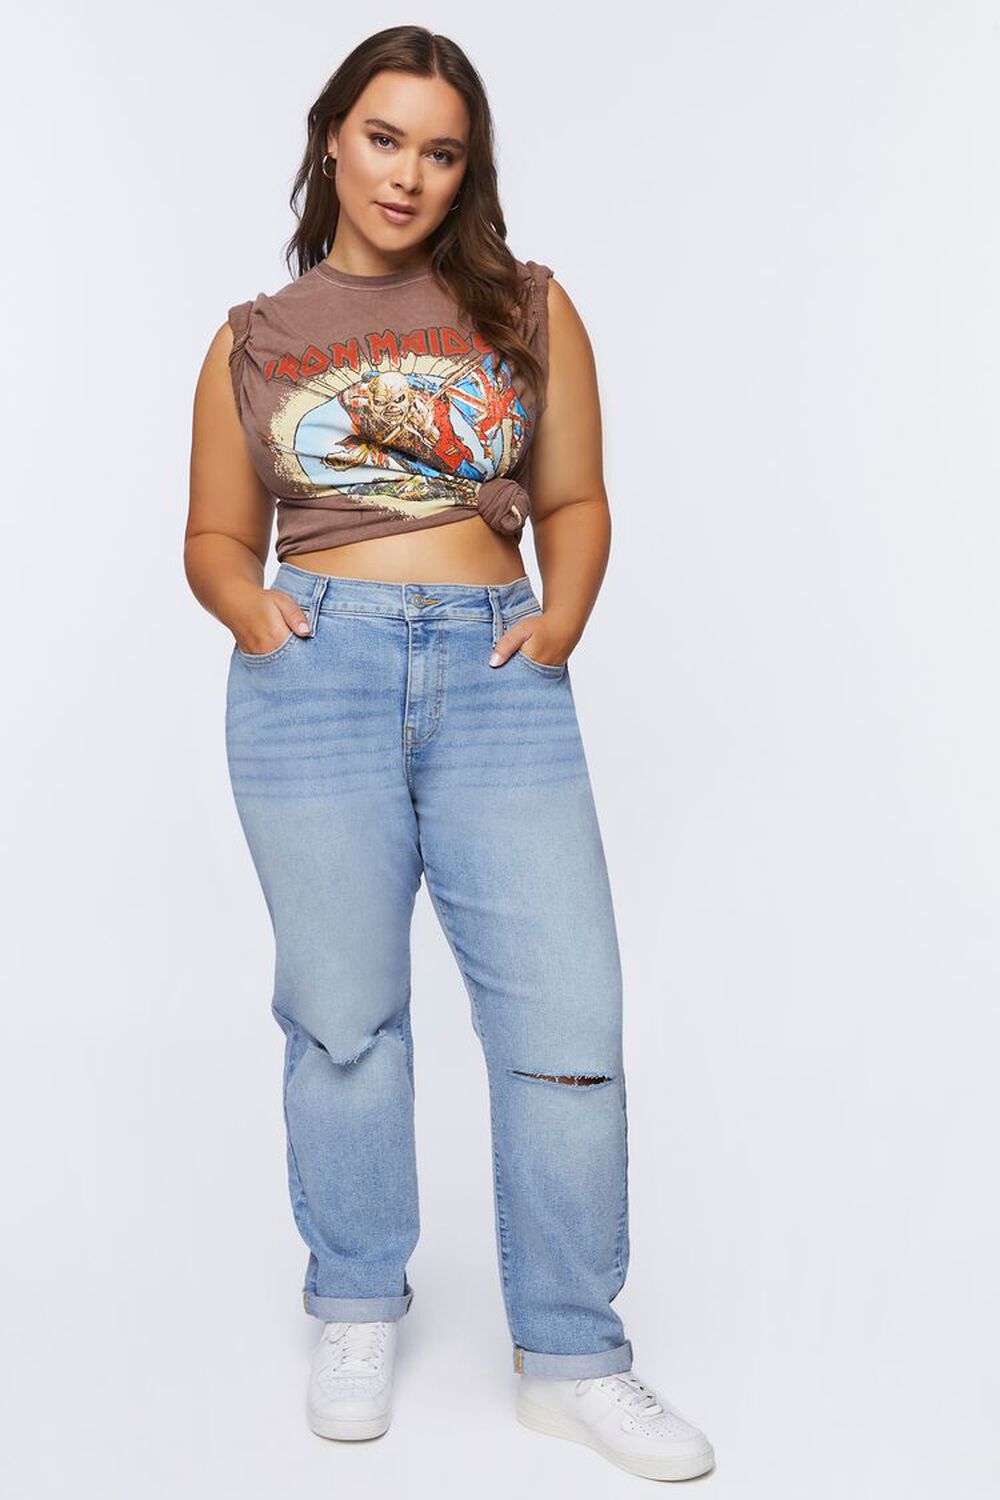 Plus Size Baggy Distressed Jeans